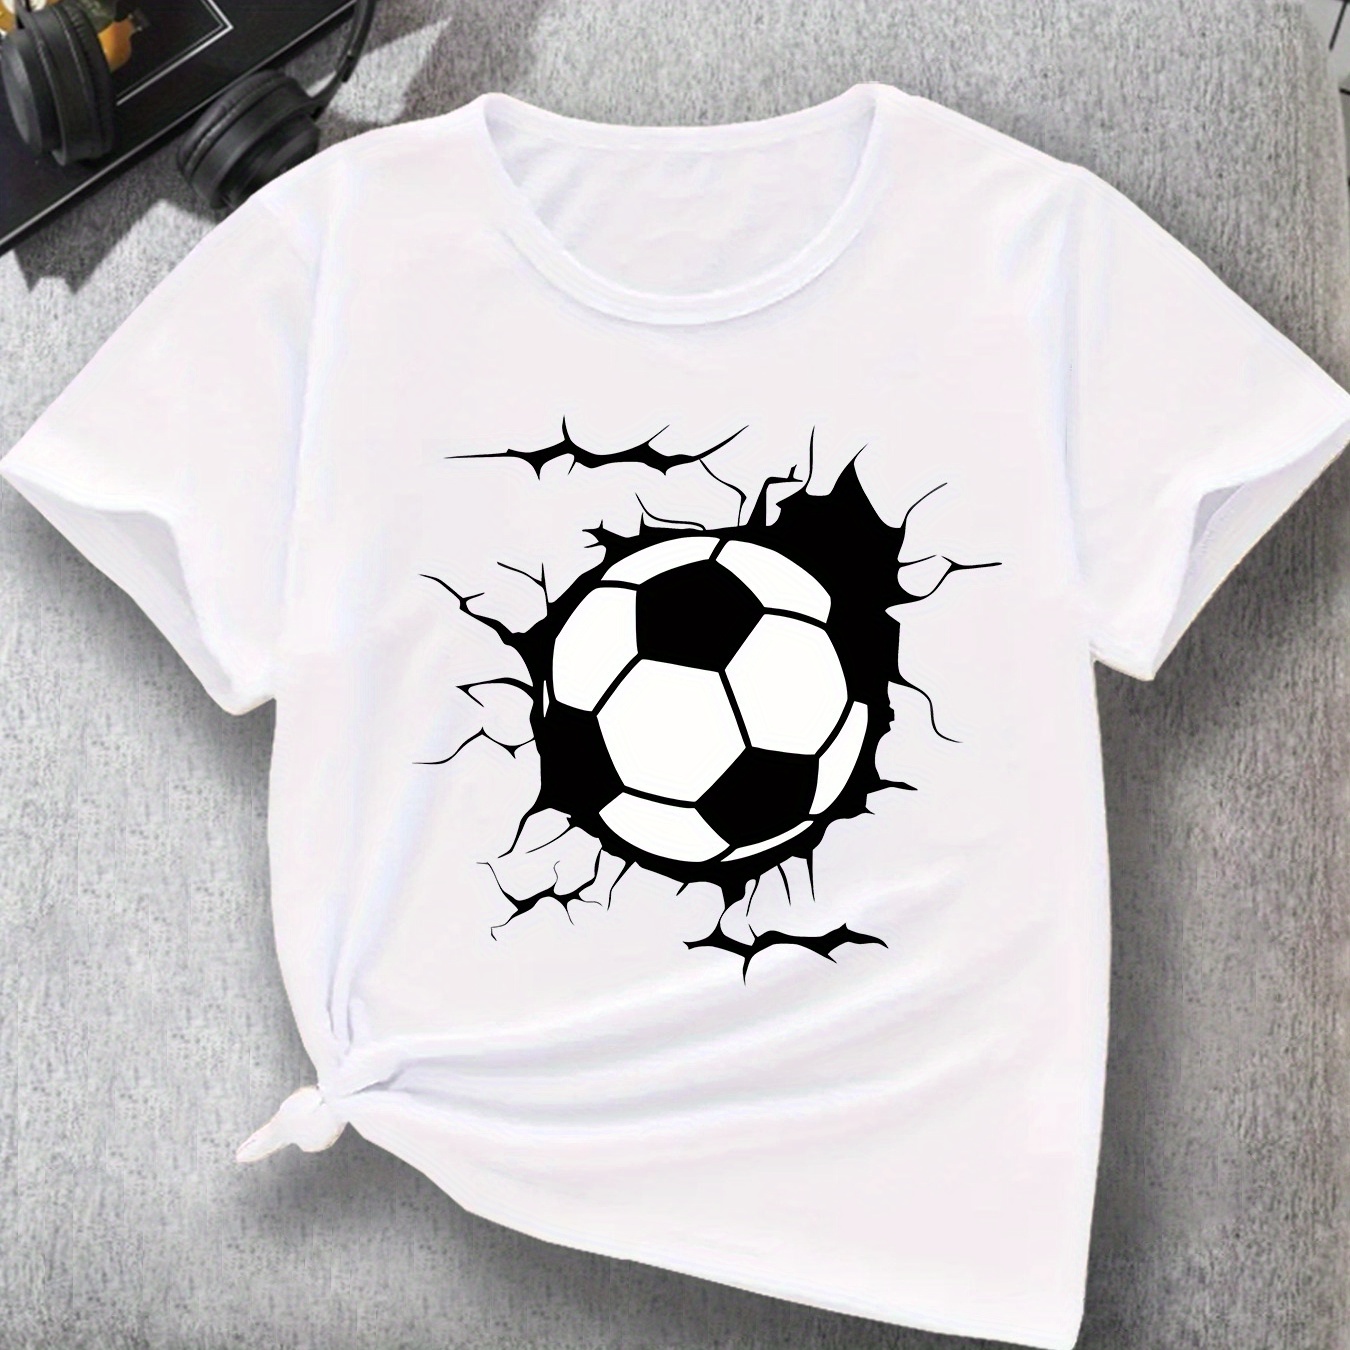 

Cute Soccer Innovative Graphic Print Casual Short Sleeve T-shirt For Boys, Lightweight Comfy Versatile Trendy Tee, Boys Summer Outfits Clothes